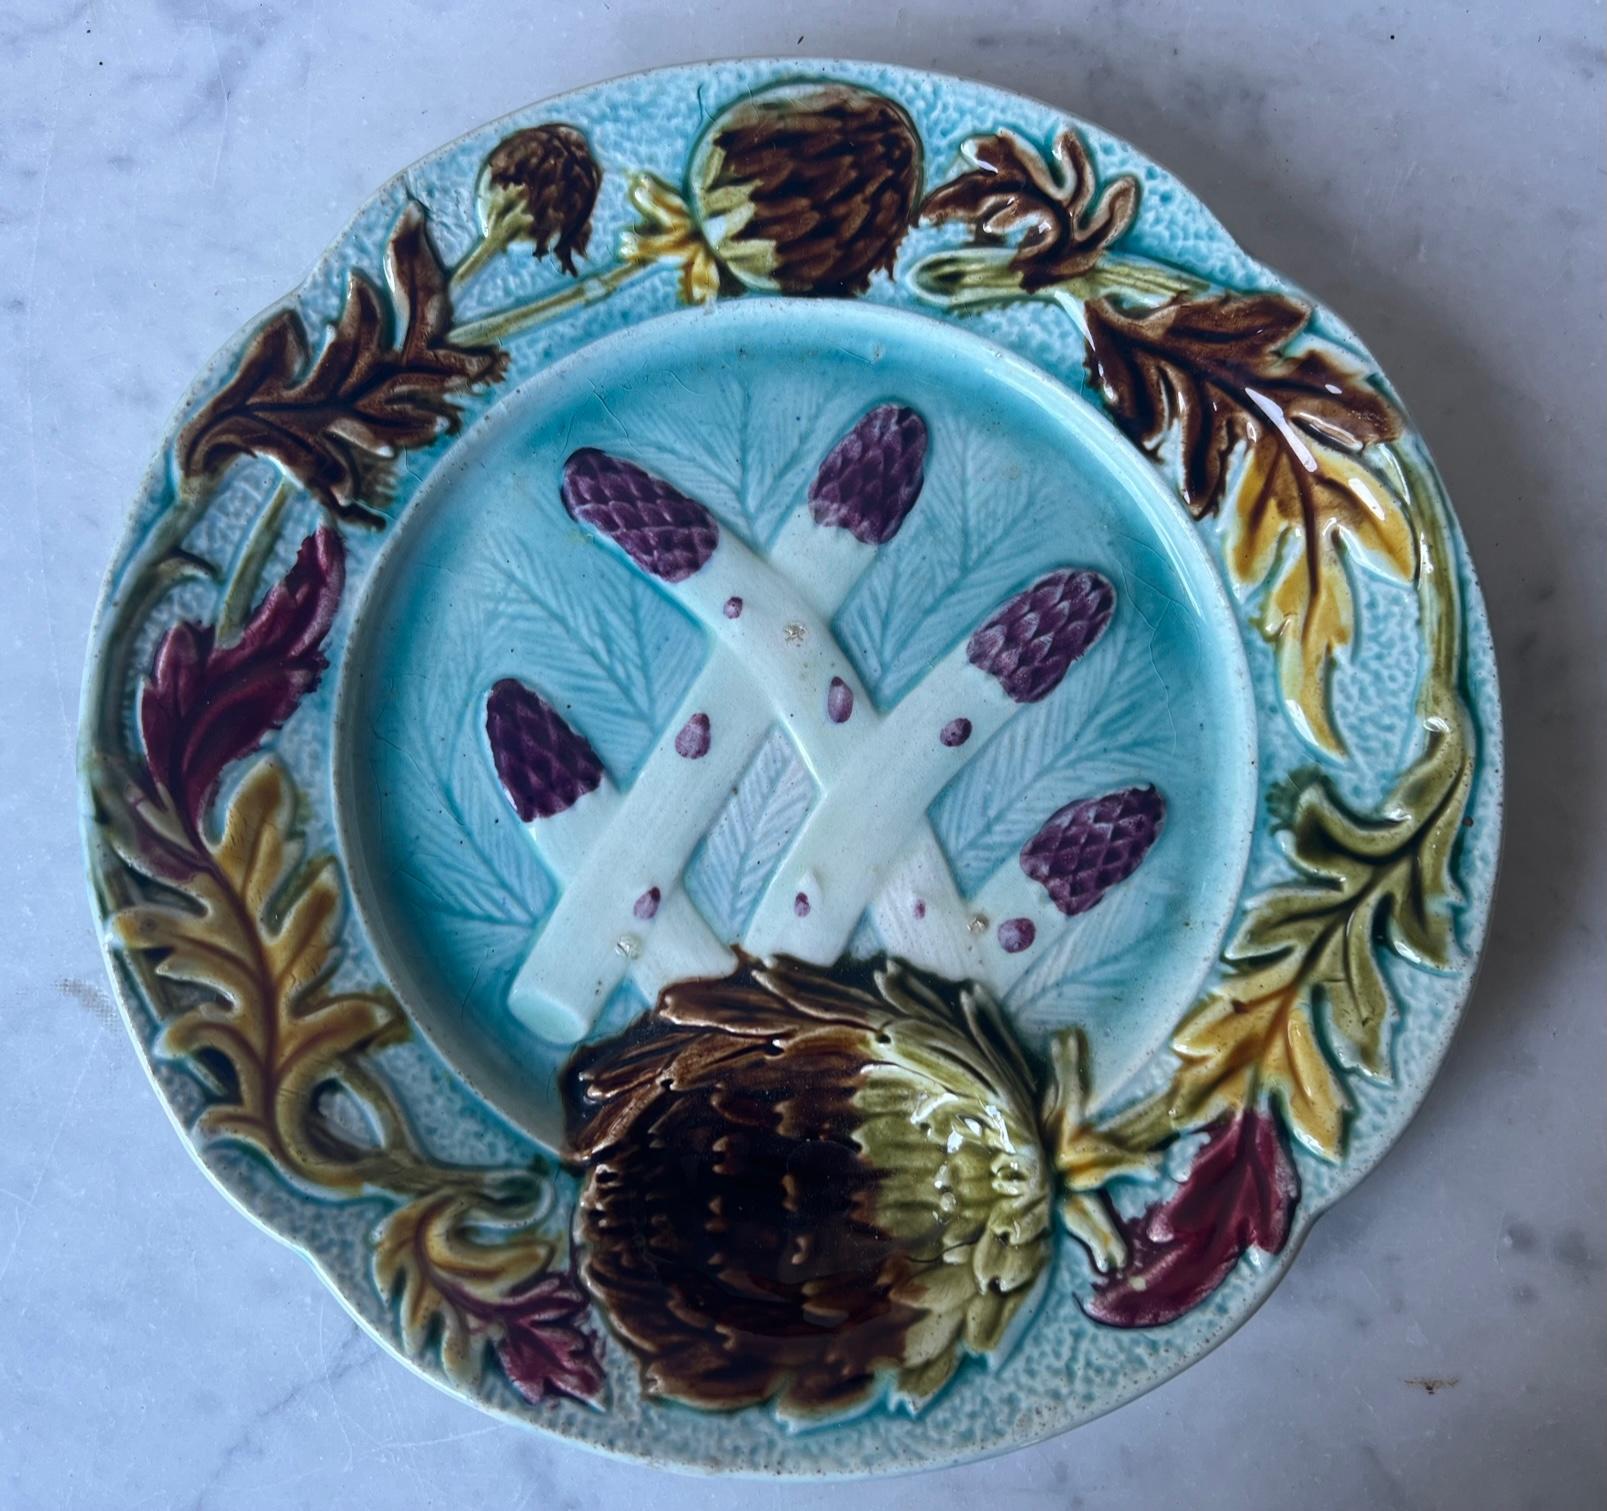 Vibrantly colored French majolica asparagus and artichoke plate made in the Orchies factory in the late 1800's. The plate has a scalloped rim with artichoke flowers and fall colored leaves, the largest flower is a depressed sauce well. The center of